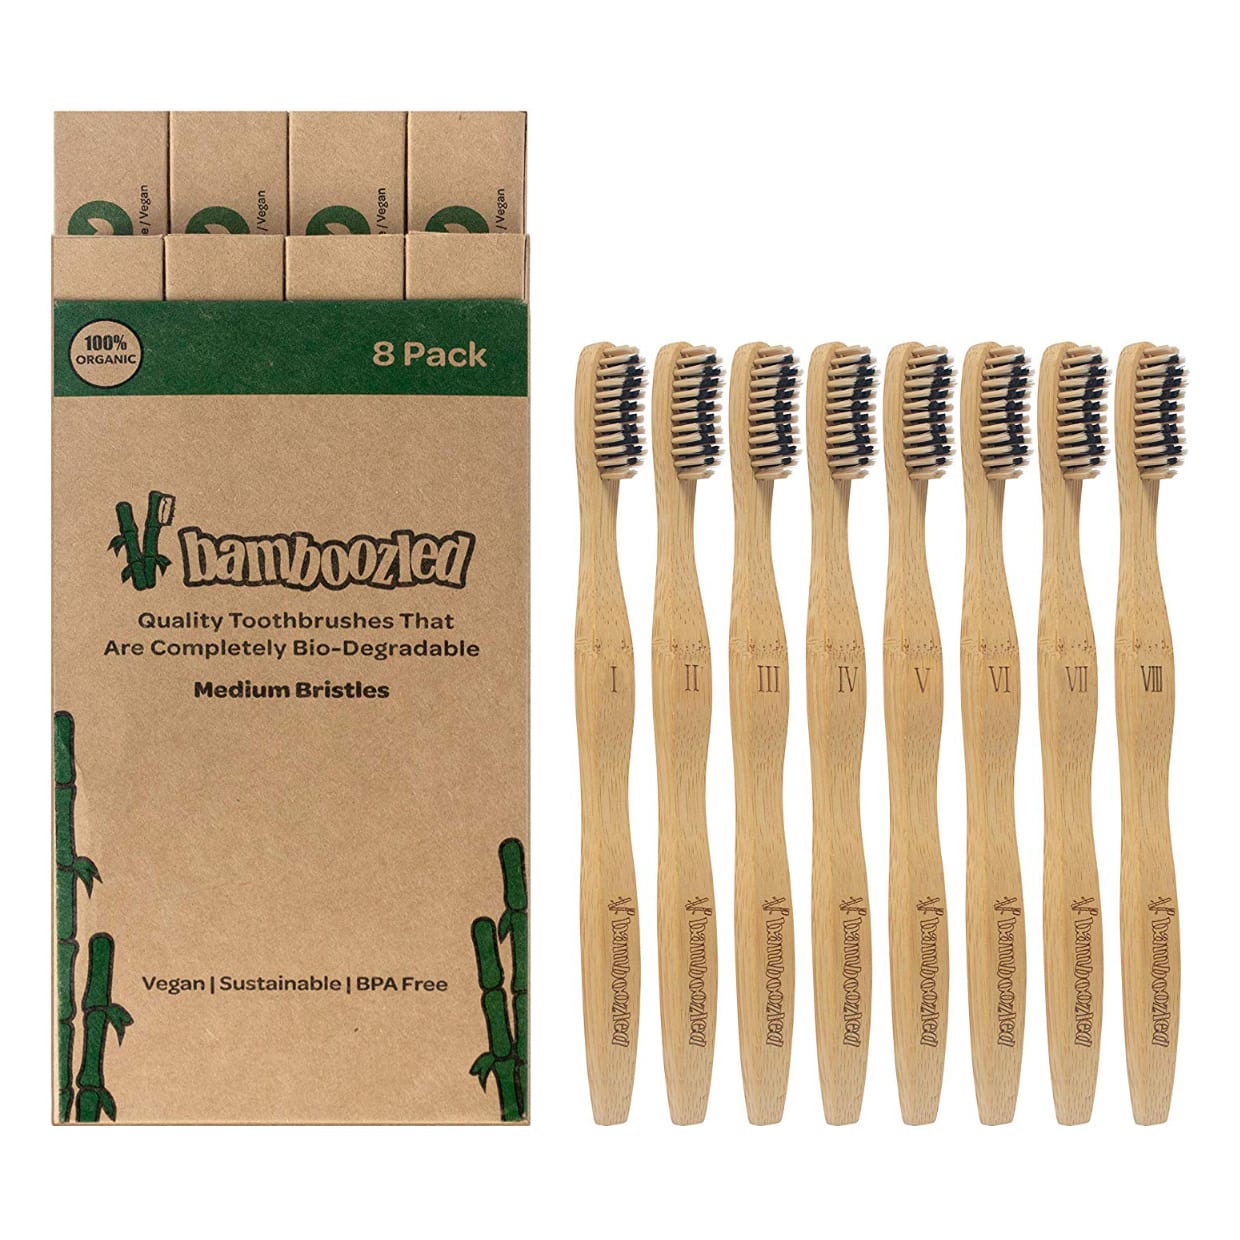 Biodegradable packaging next to bamboo toothbrushes on white.